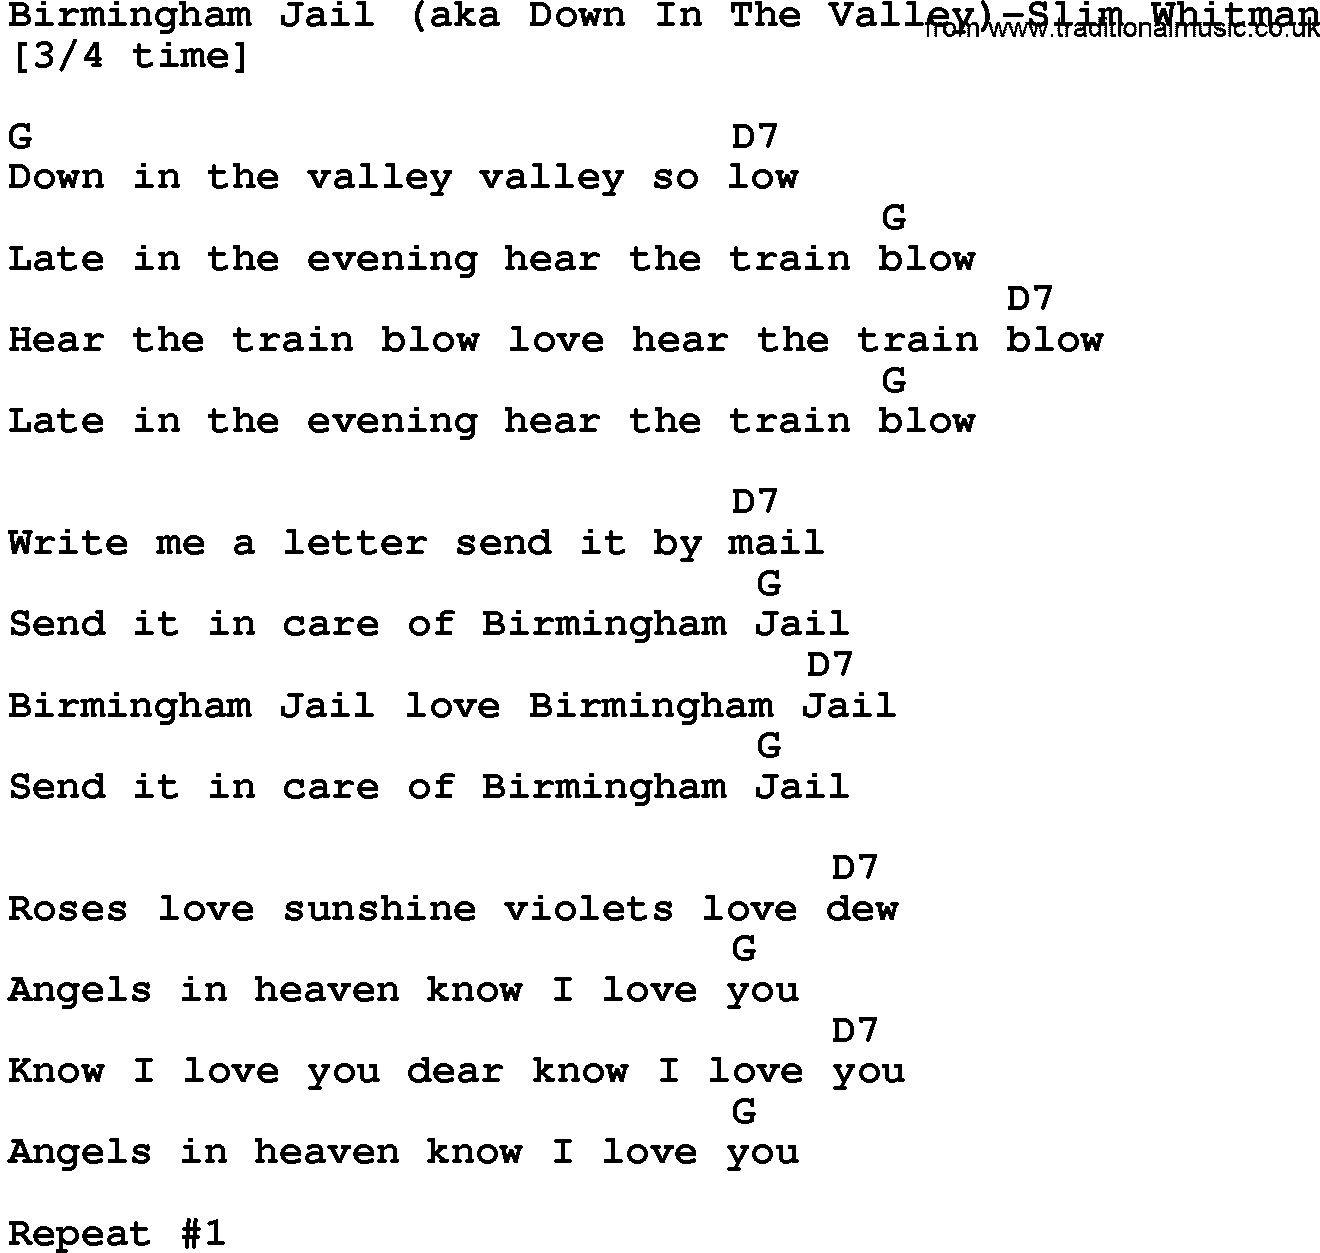 Country music song: Birmingham Jail(Aka Down In The Valley)-Slim Whitman lyrics and chords